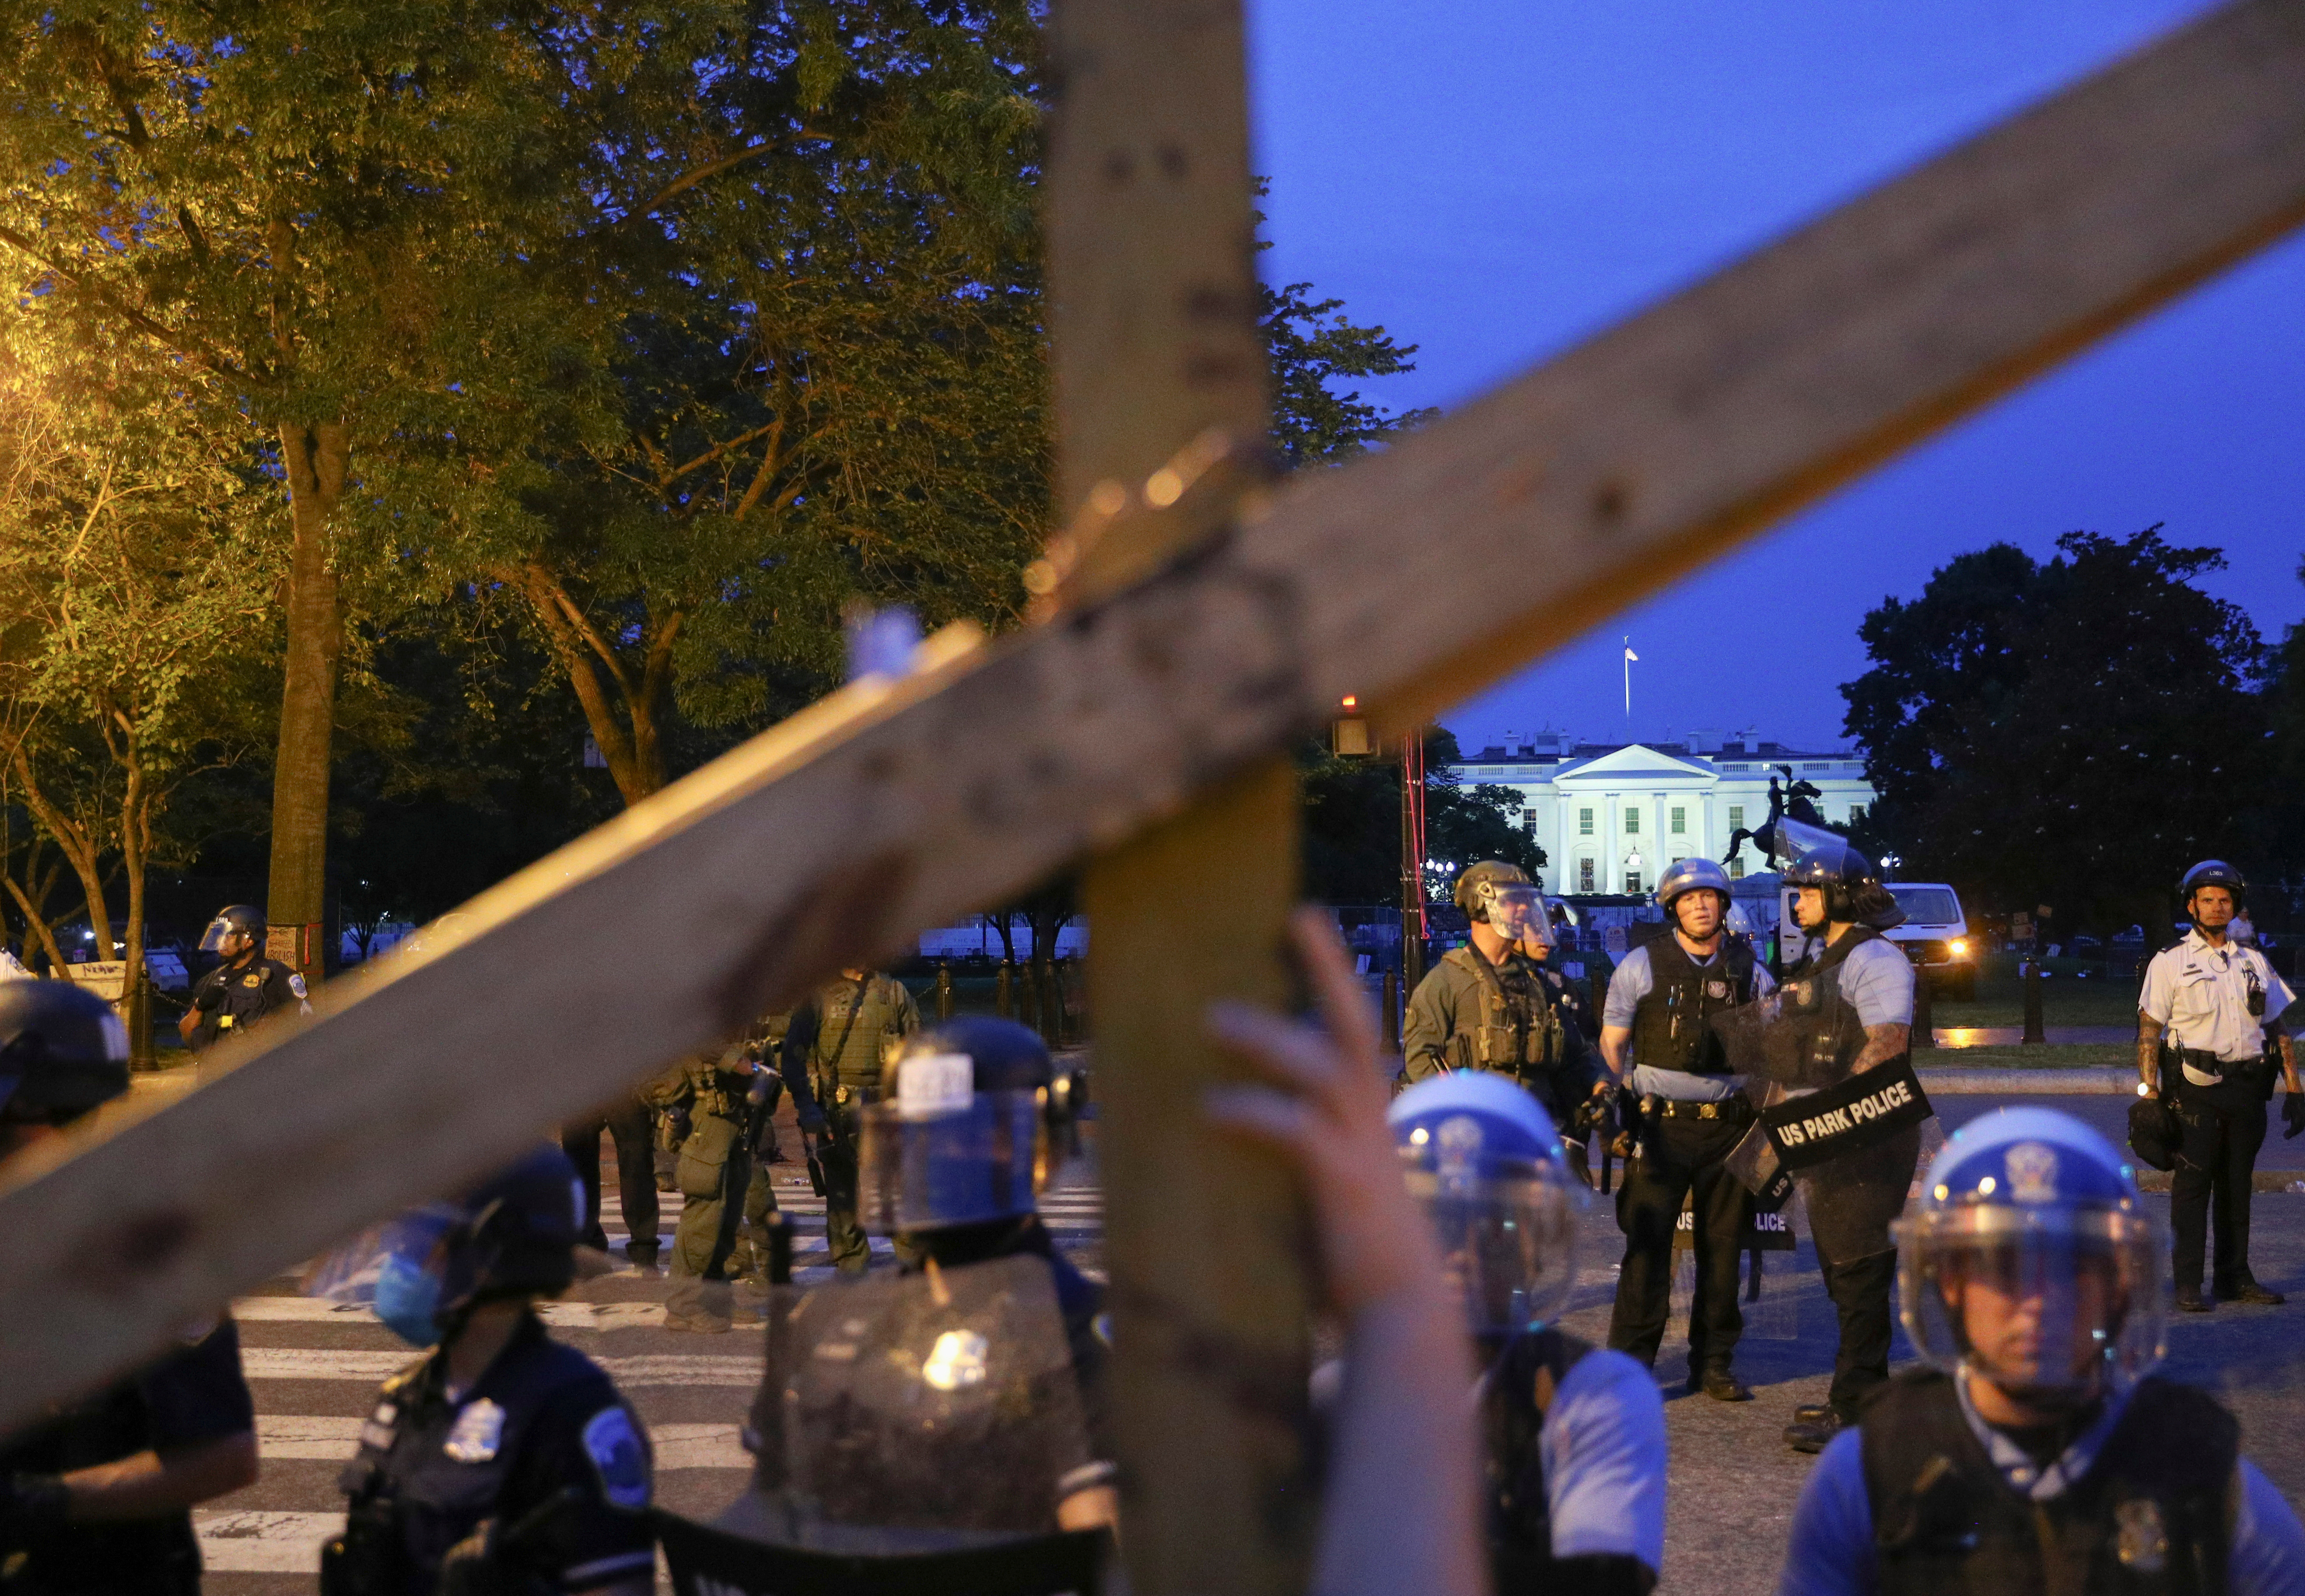 Protestors and police face off at Lafayette Park in front of the White House after police clashed with demonstrators trying to pull down the statue of U.S. President Andrew Jackson in the park during racial inequality protests in Washington, U.S., June 22, 2020. REUTERS/Tom Brenner